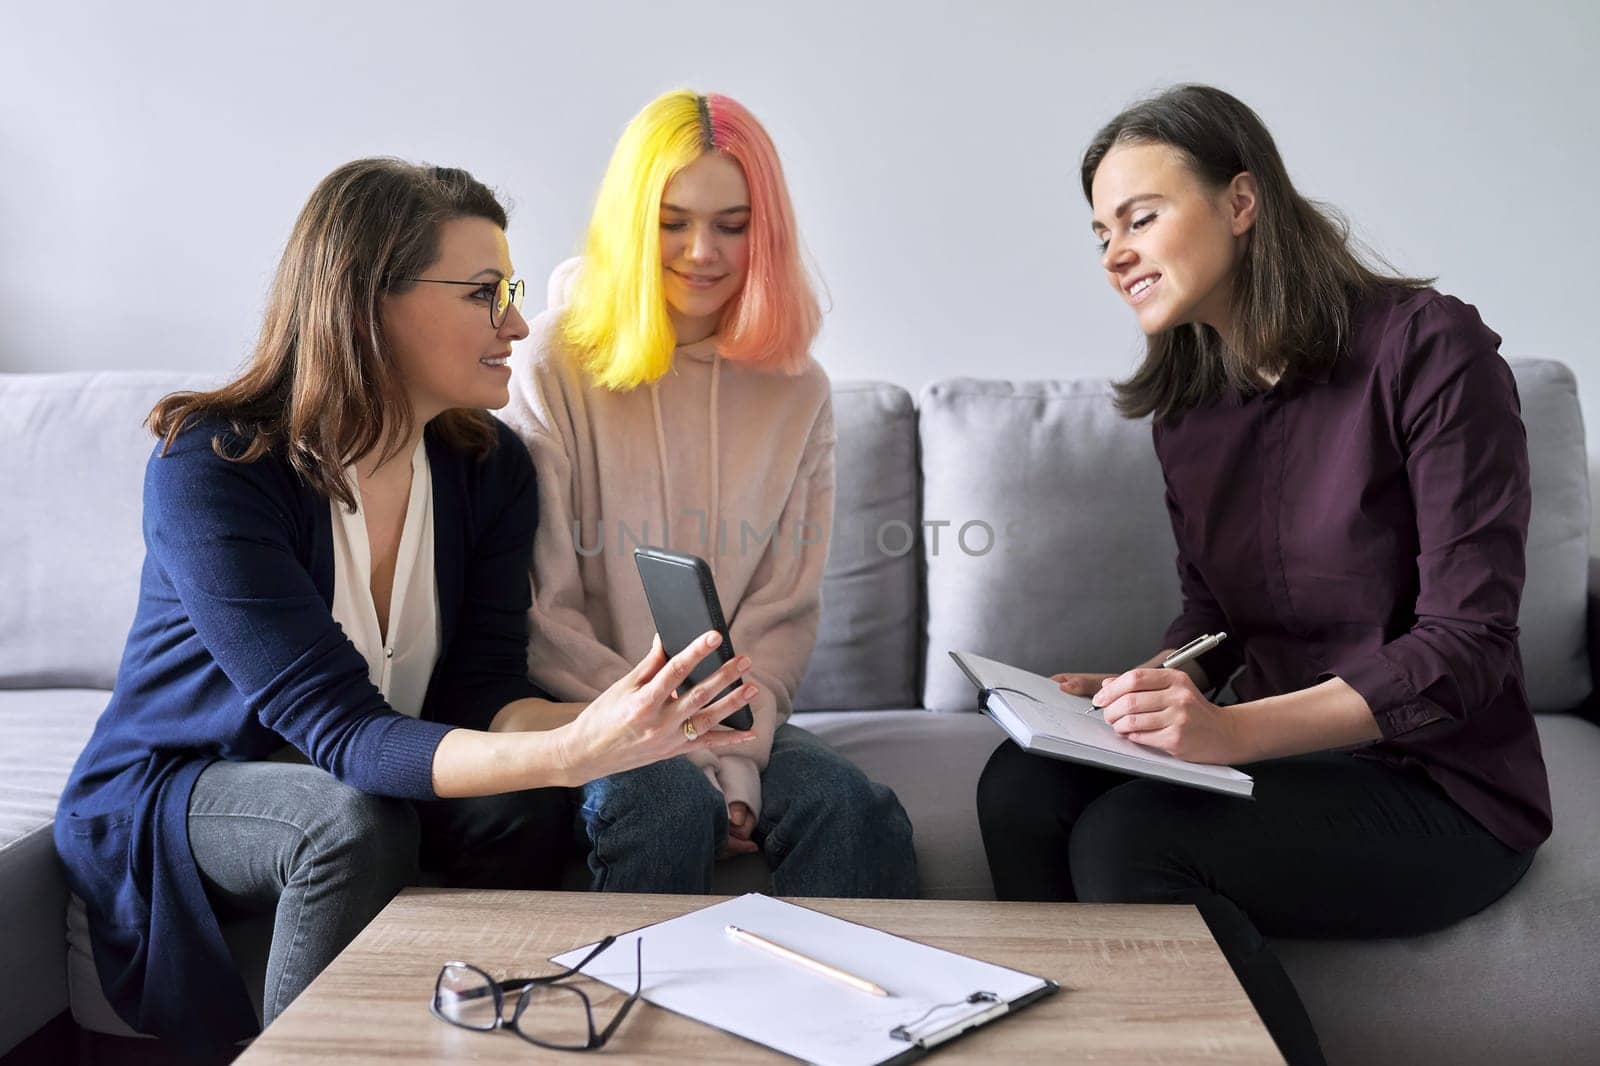 Social worker, psychologist, counselor at meeting with mature woman and her teenage daughter. Psychology, family mental health, adolescence problems, mother daughter child parent relationships